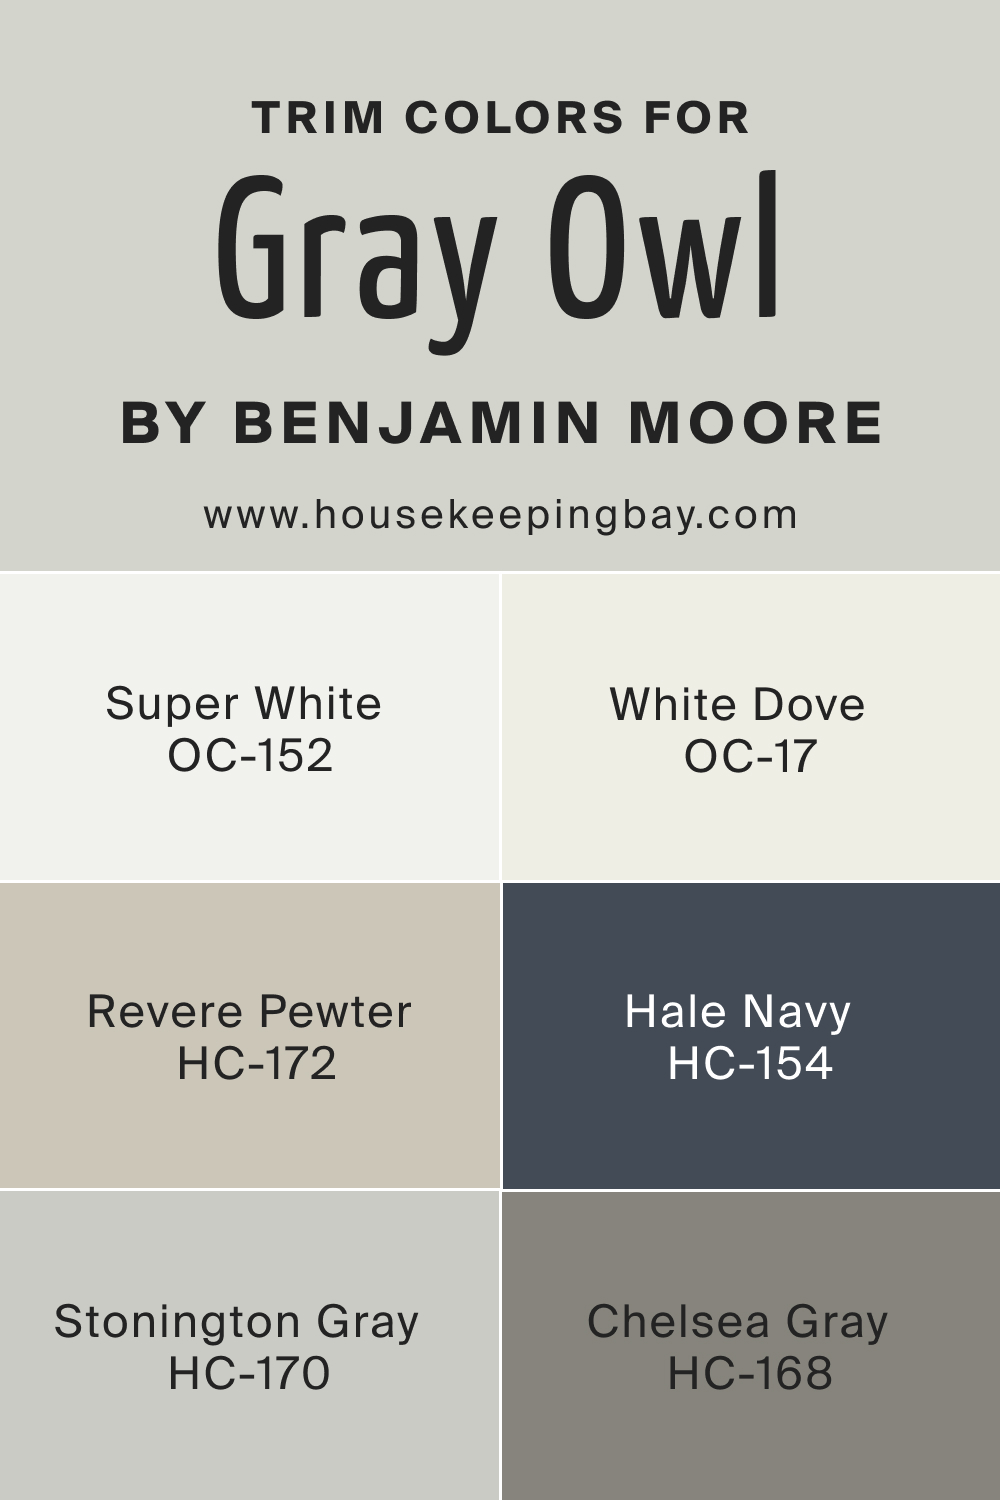 What Is the Best Trim Color to Use With BM Gray Owl